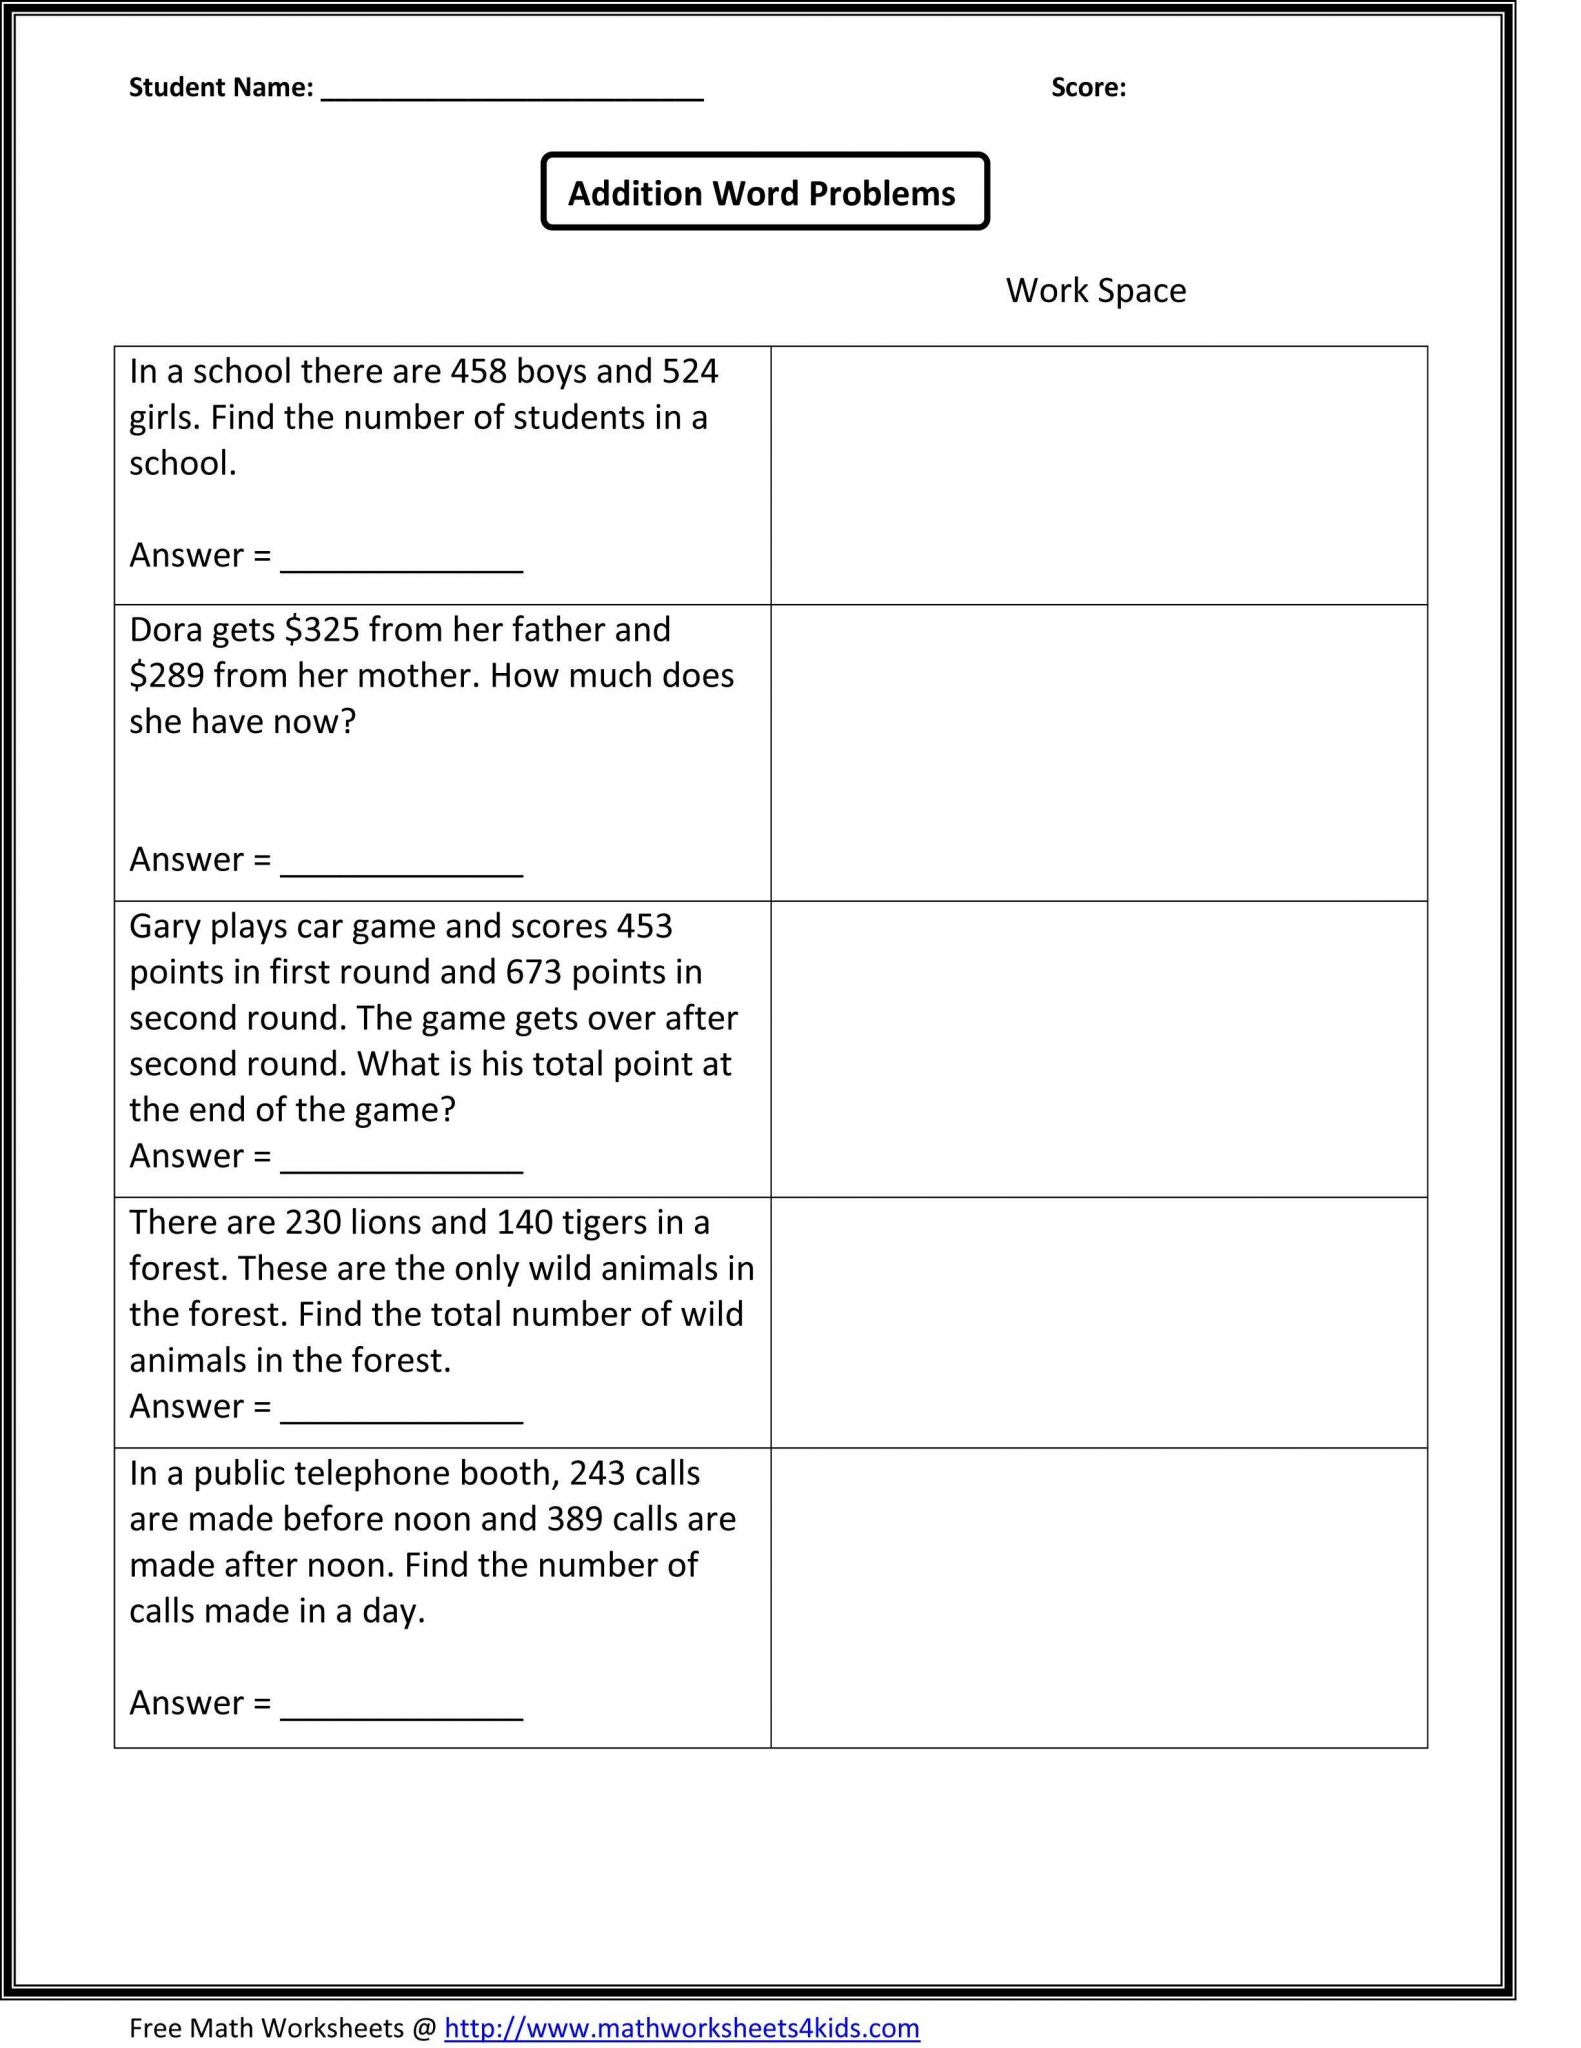 Daddy Day Care Video Worksheet Answer Key as Well as Super Kids Worksheets Math Primary Maths Free Printable Ks3 to Print